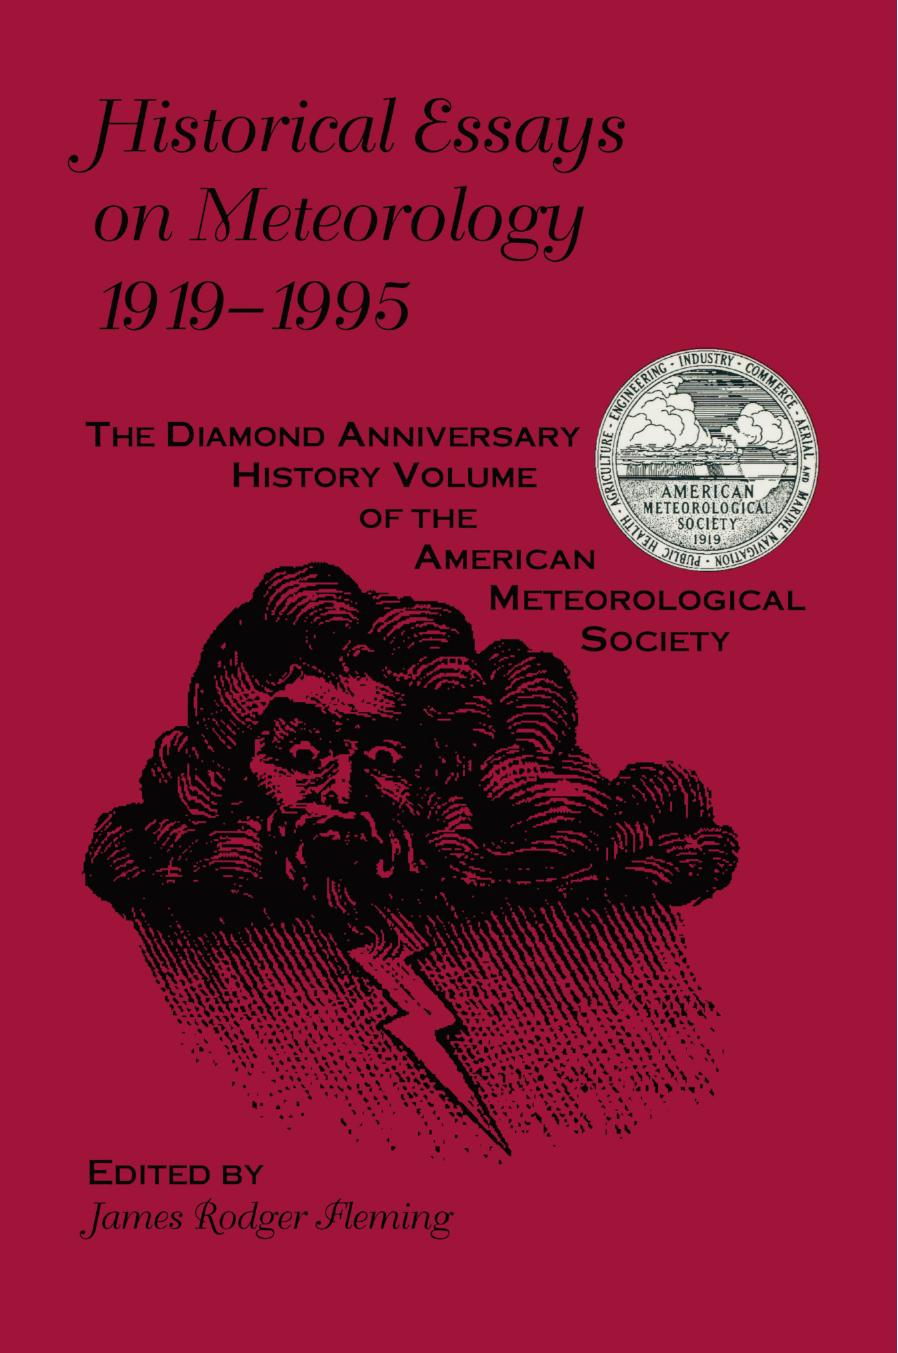 Historical Essays on Meteorology, 1919–1995: The Diamond Anniversary History Volume of the American Meteorological Society